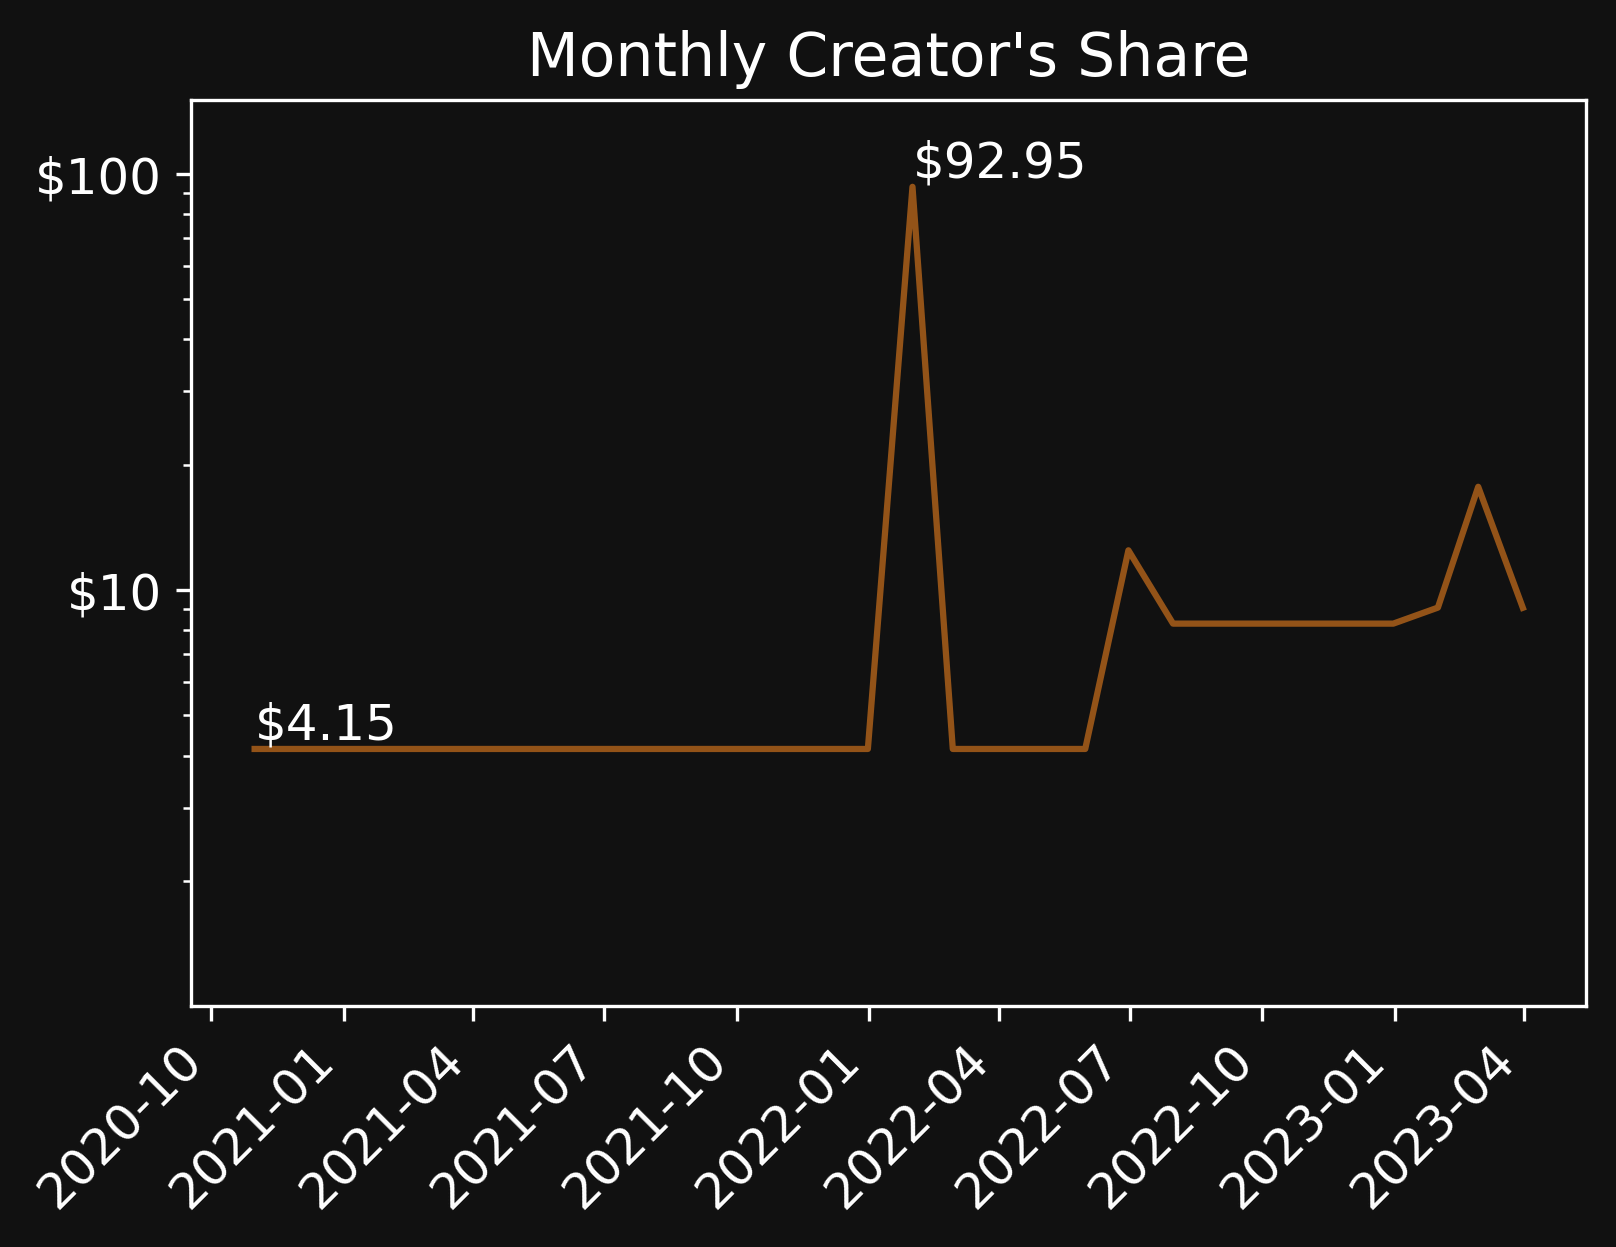 Monthly earnings since October 2020 after platform fees